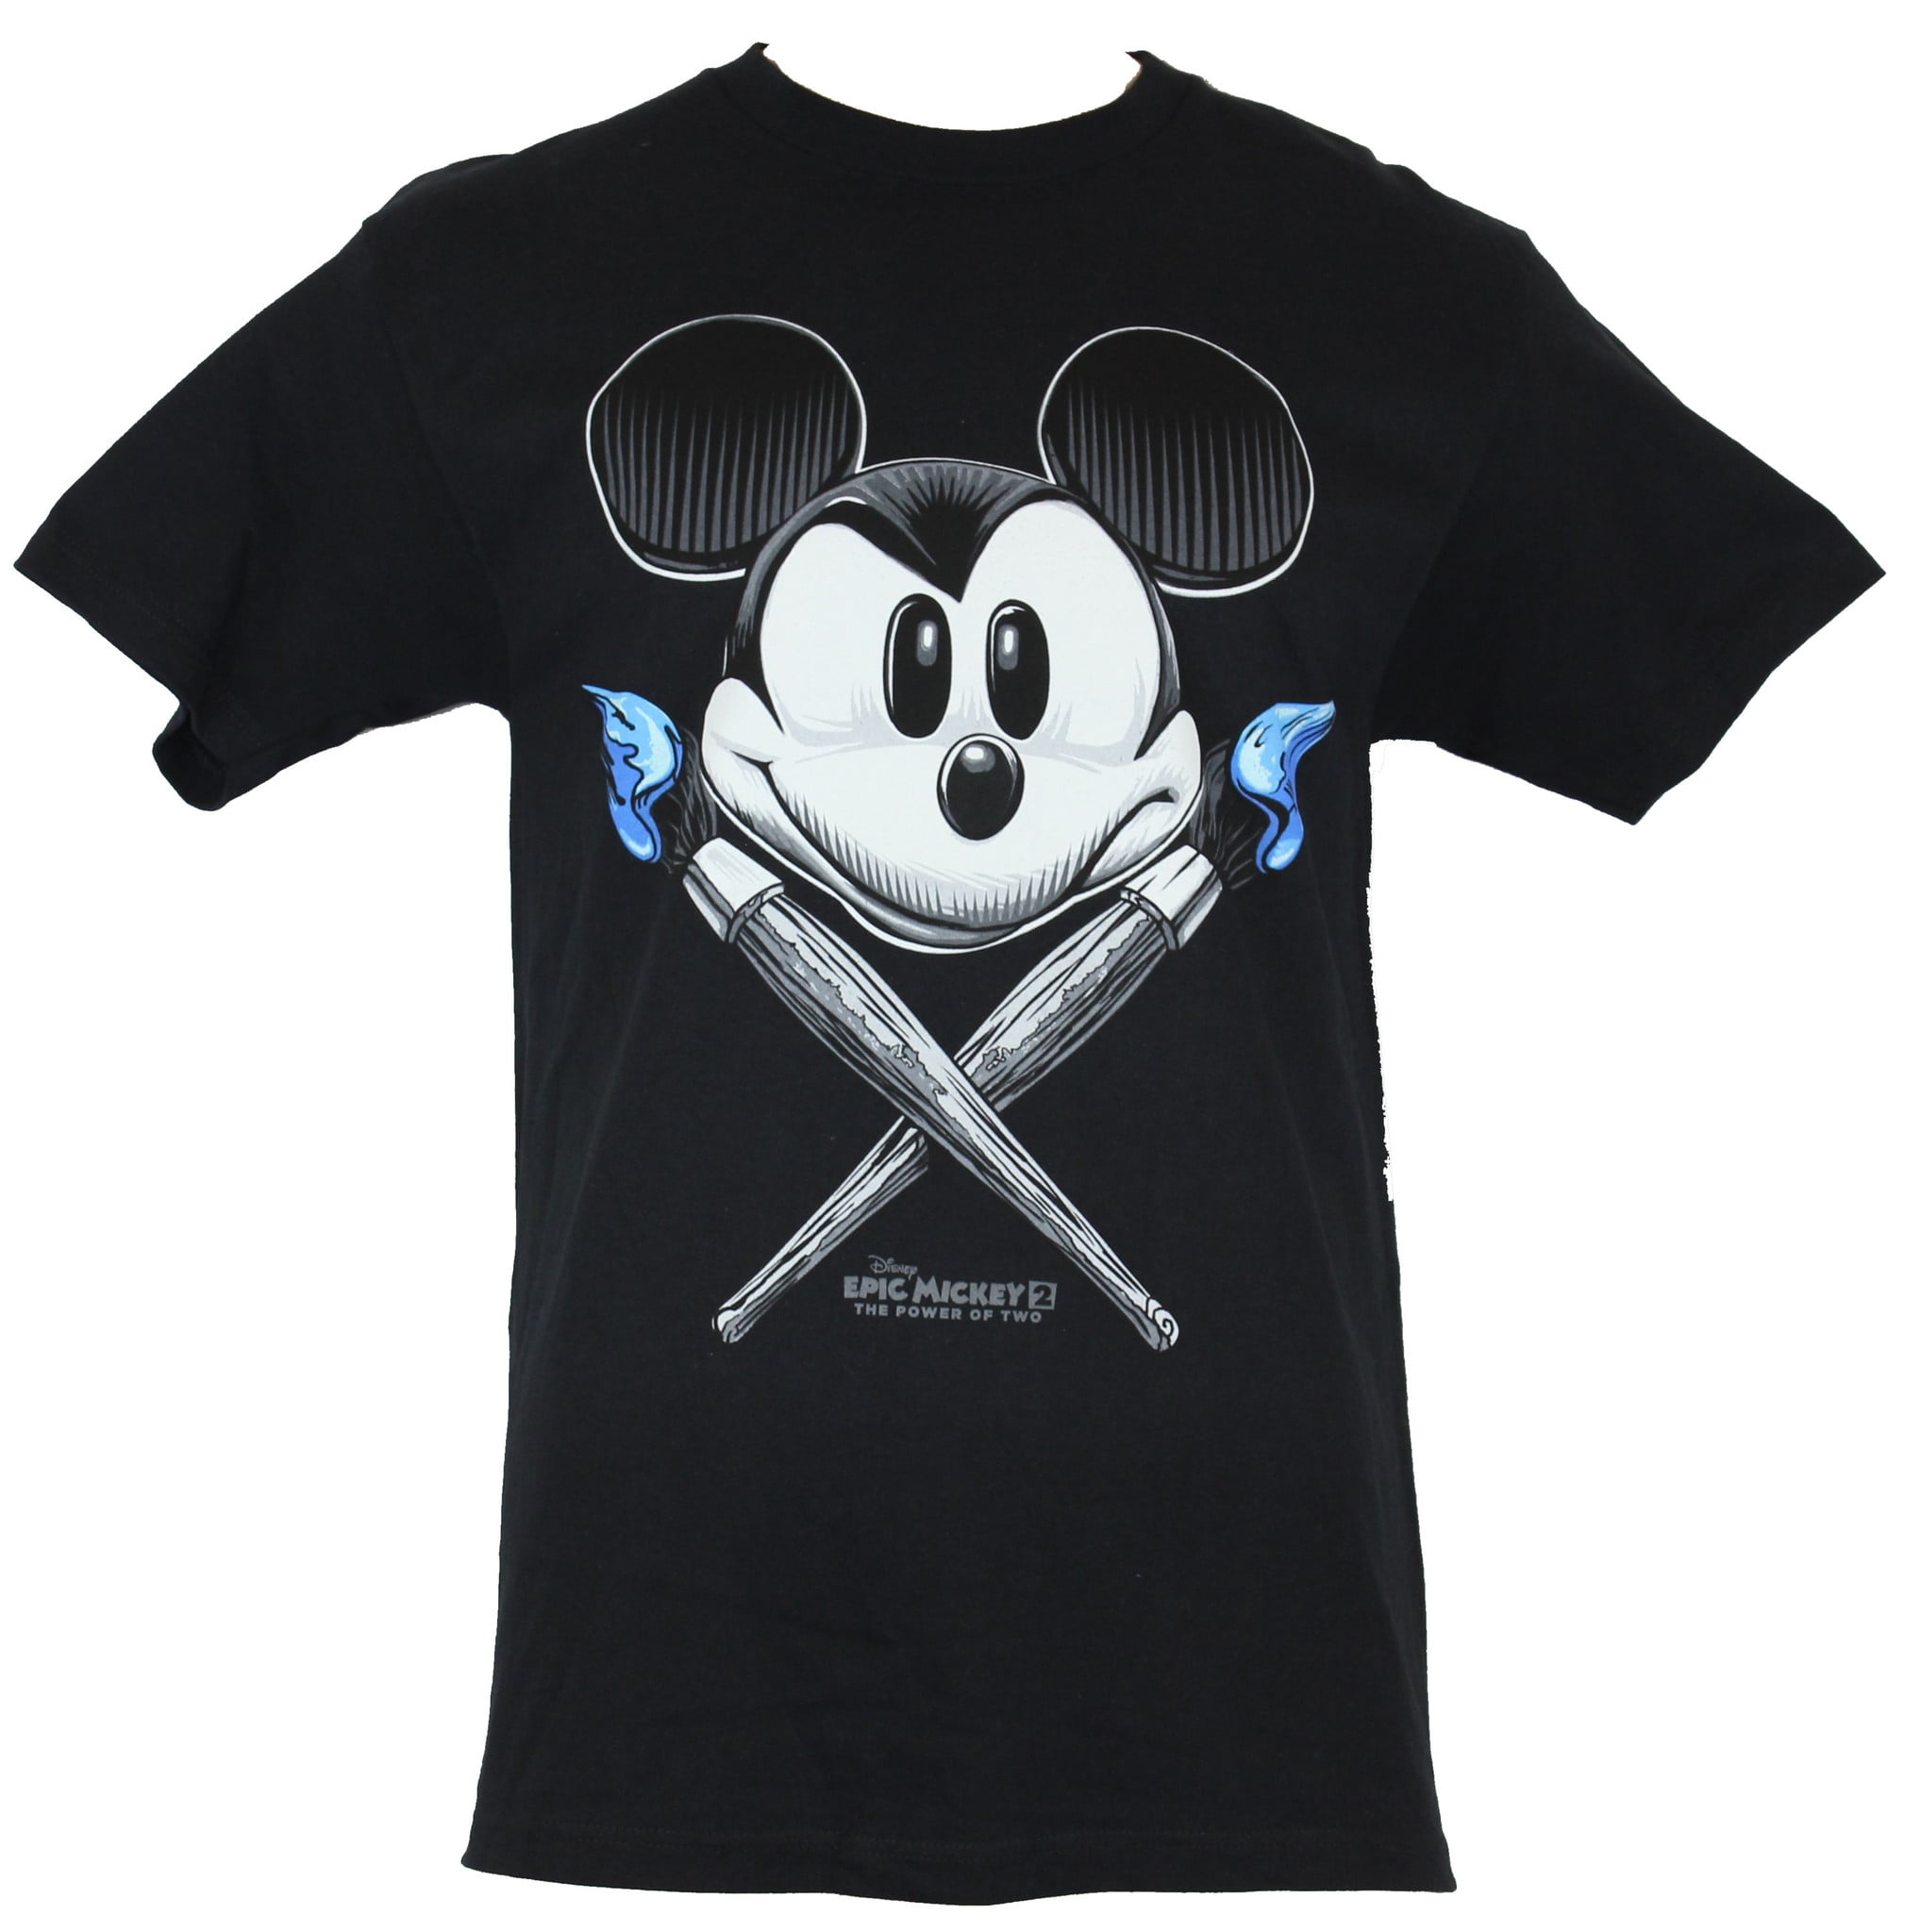 EPIC MICKEY 2 POWER OF TWO BOTH BRUSHES BLACK COLOR LICENSED T-SHIRT 